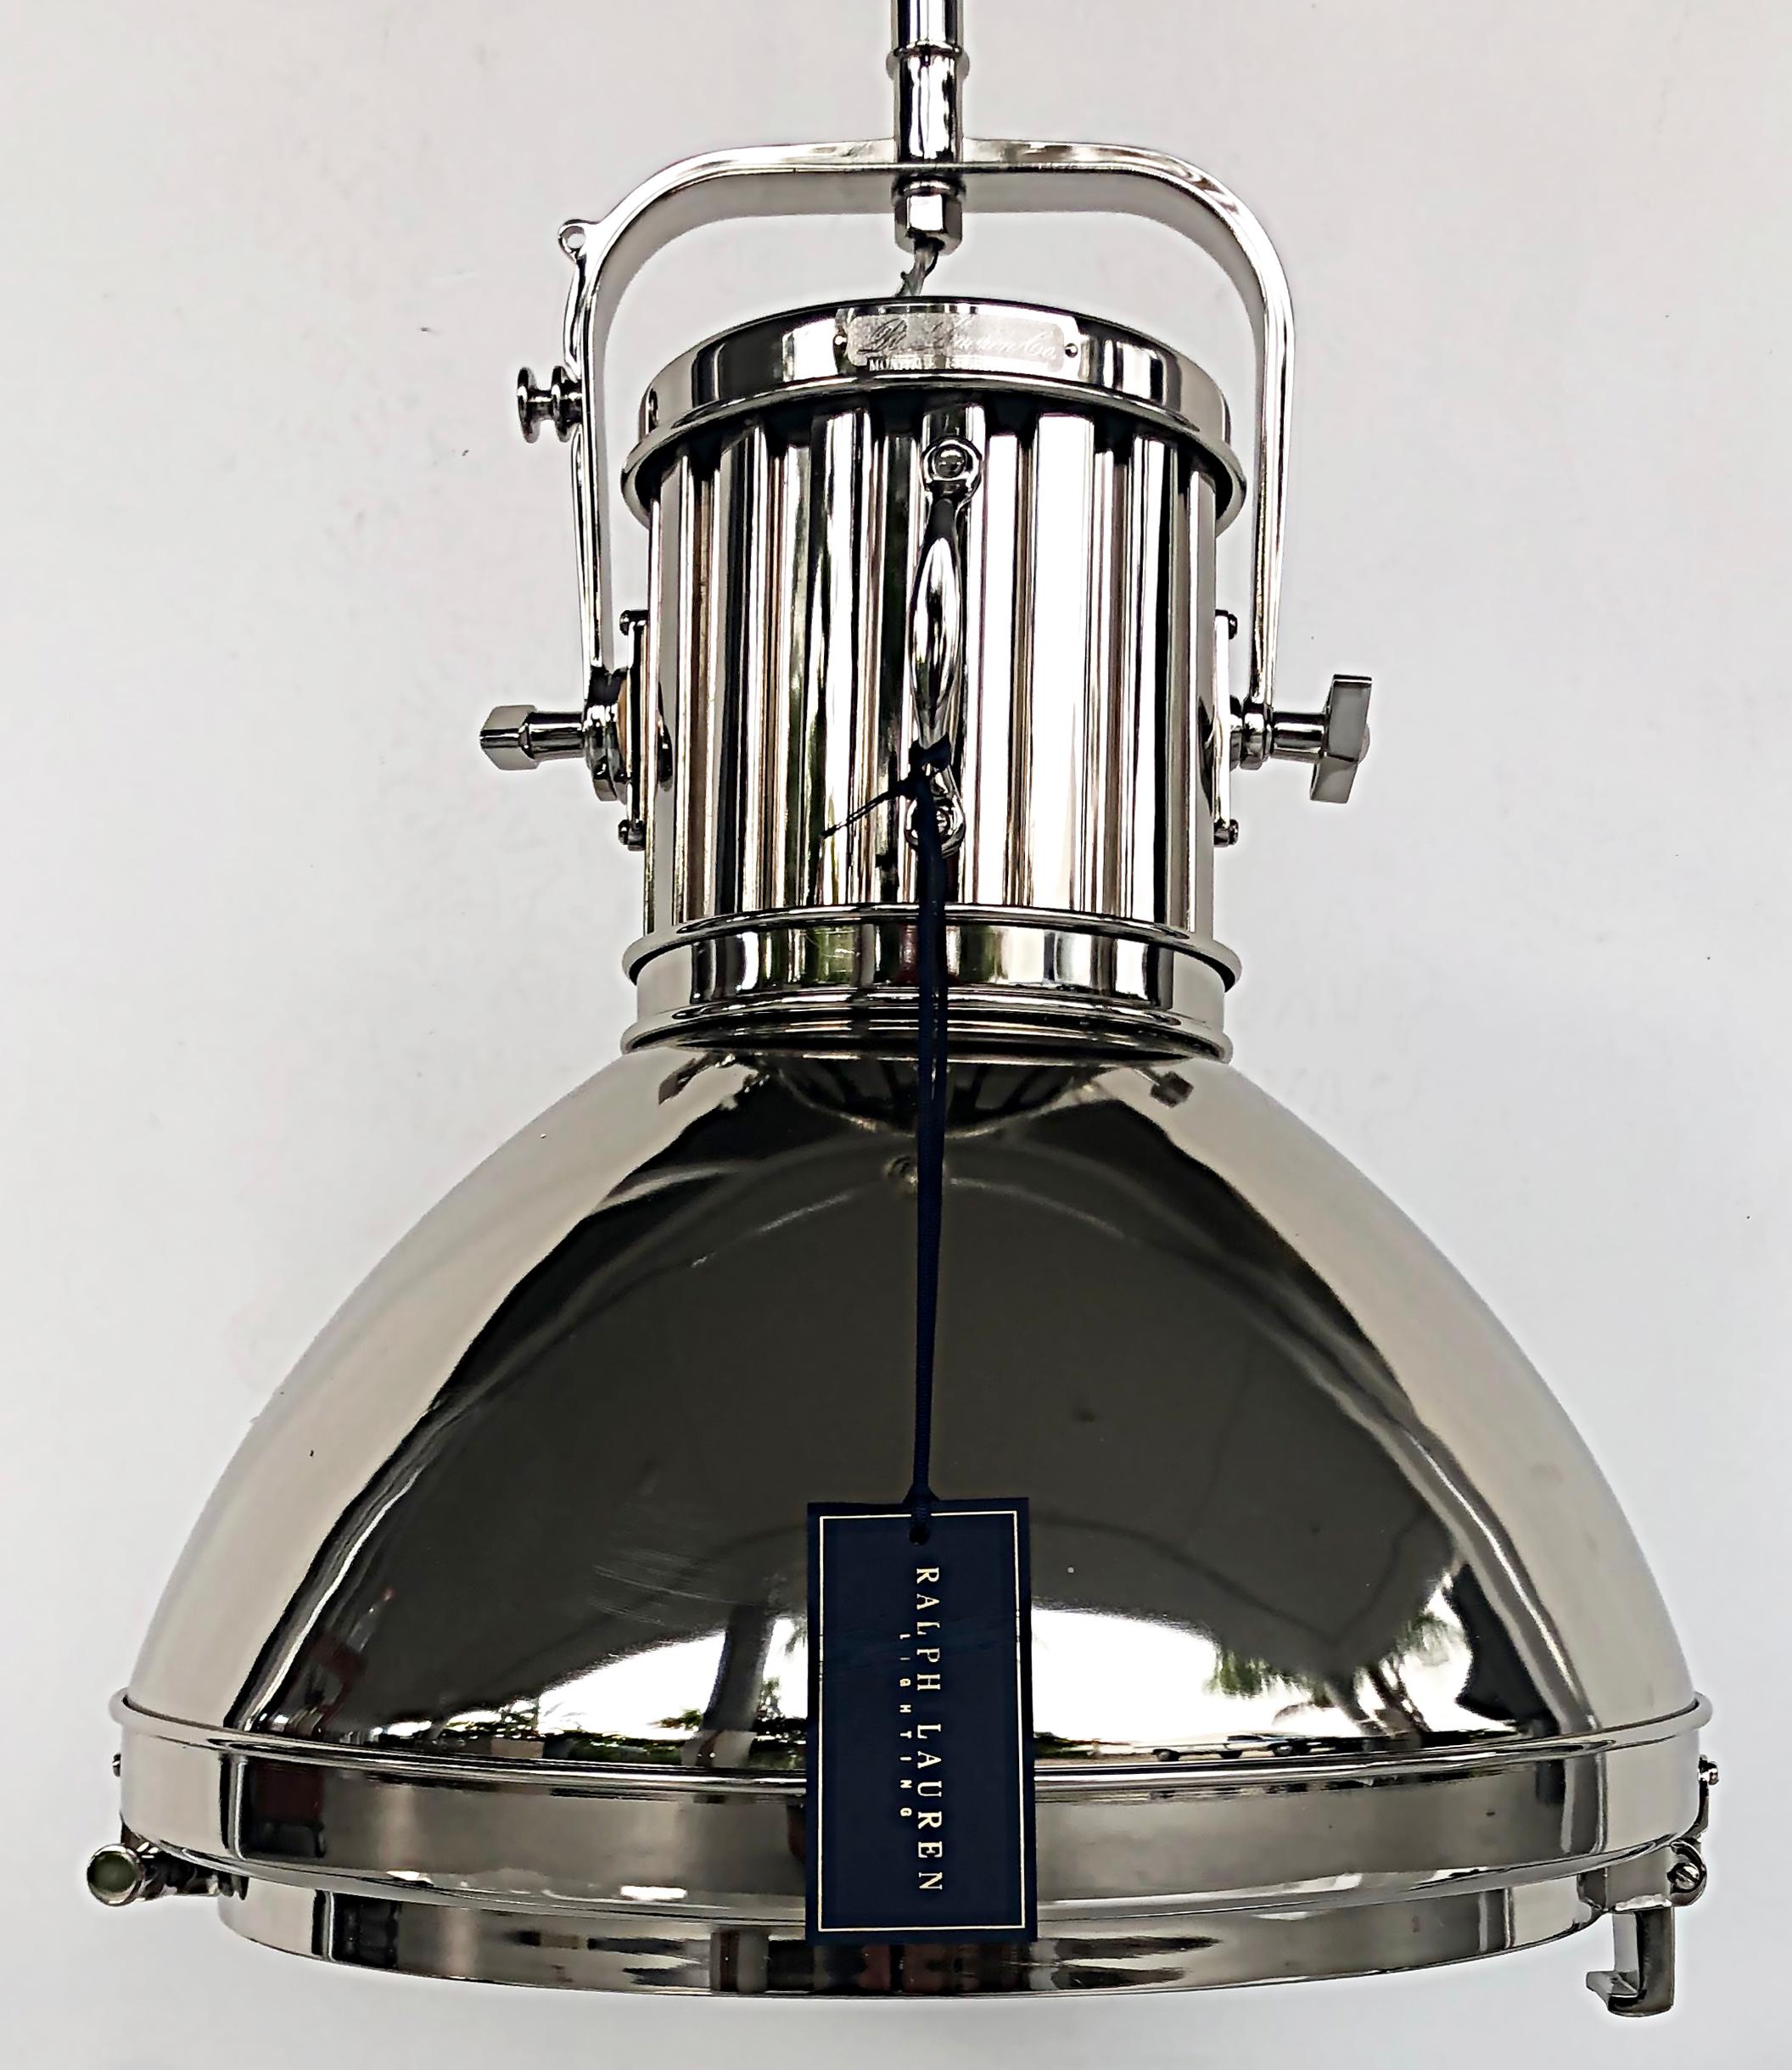 New Ralph Lauren nickel Montauk pendant fight fixture with canopy and tags


 Offered for sale is a never used new Ralph Lauren polished nickel Montauk pendant light fixture with canopy that we acquired in the original box and wrapping. The light